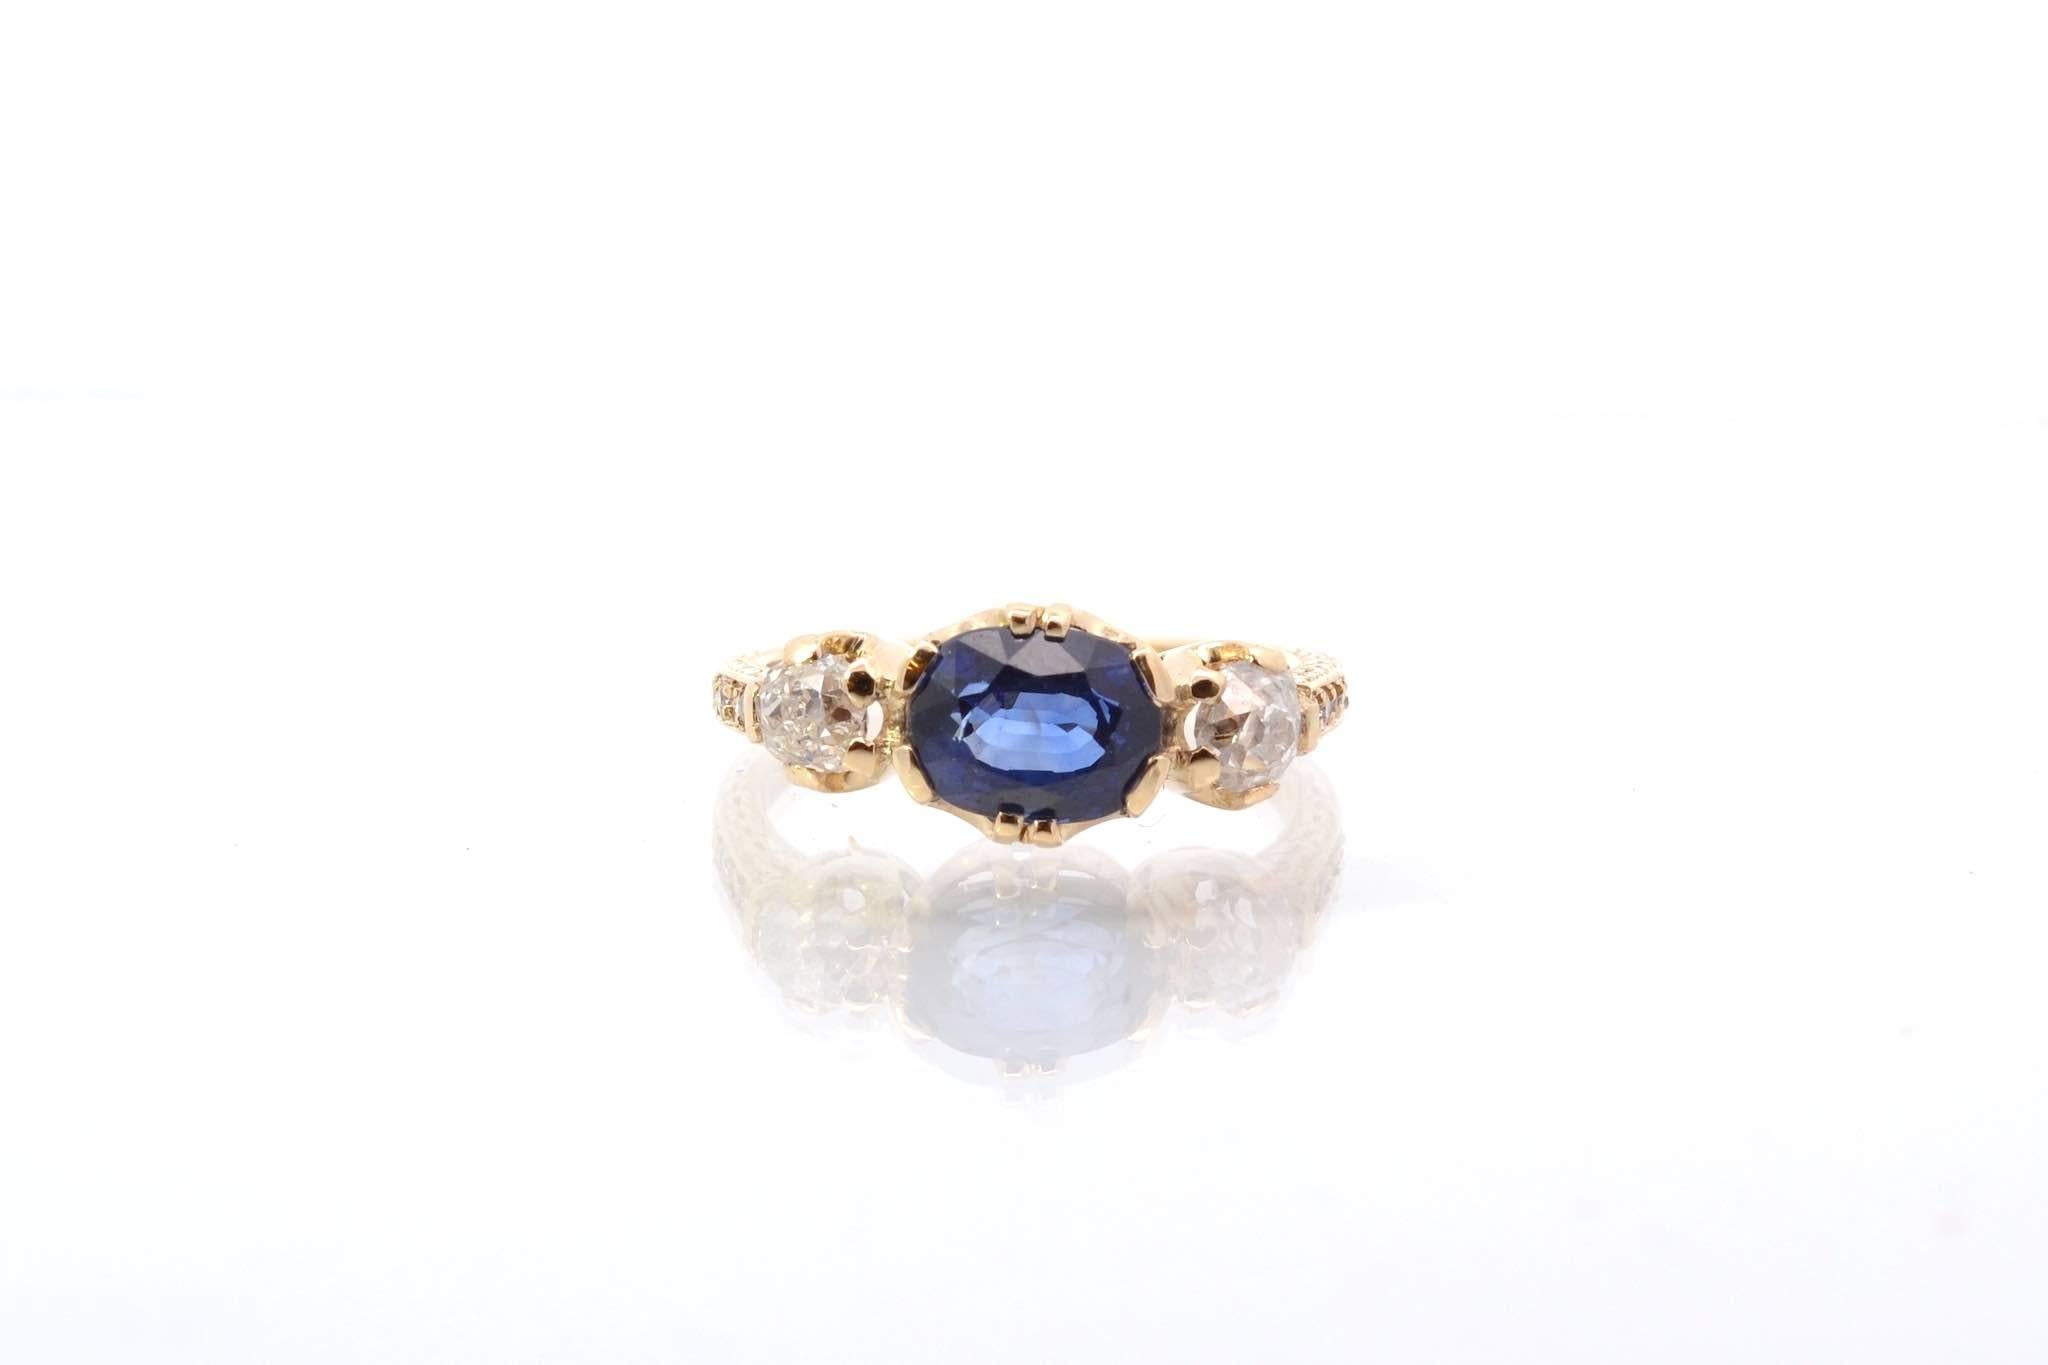 Stones: Oval sapphire 2.16 cts and 2 old cut diamonds: 0.78 ct
Material: 18k yellow gold
Weight: 3.3g.
Period: Recent vintage style
Size: 53 (free sizing)
Certificate
Ref. : 23334